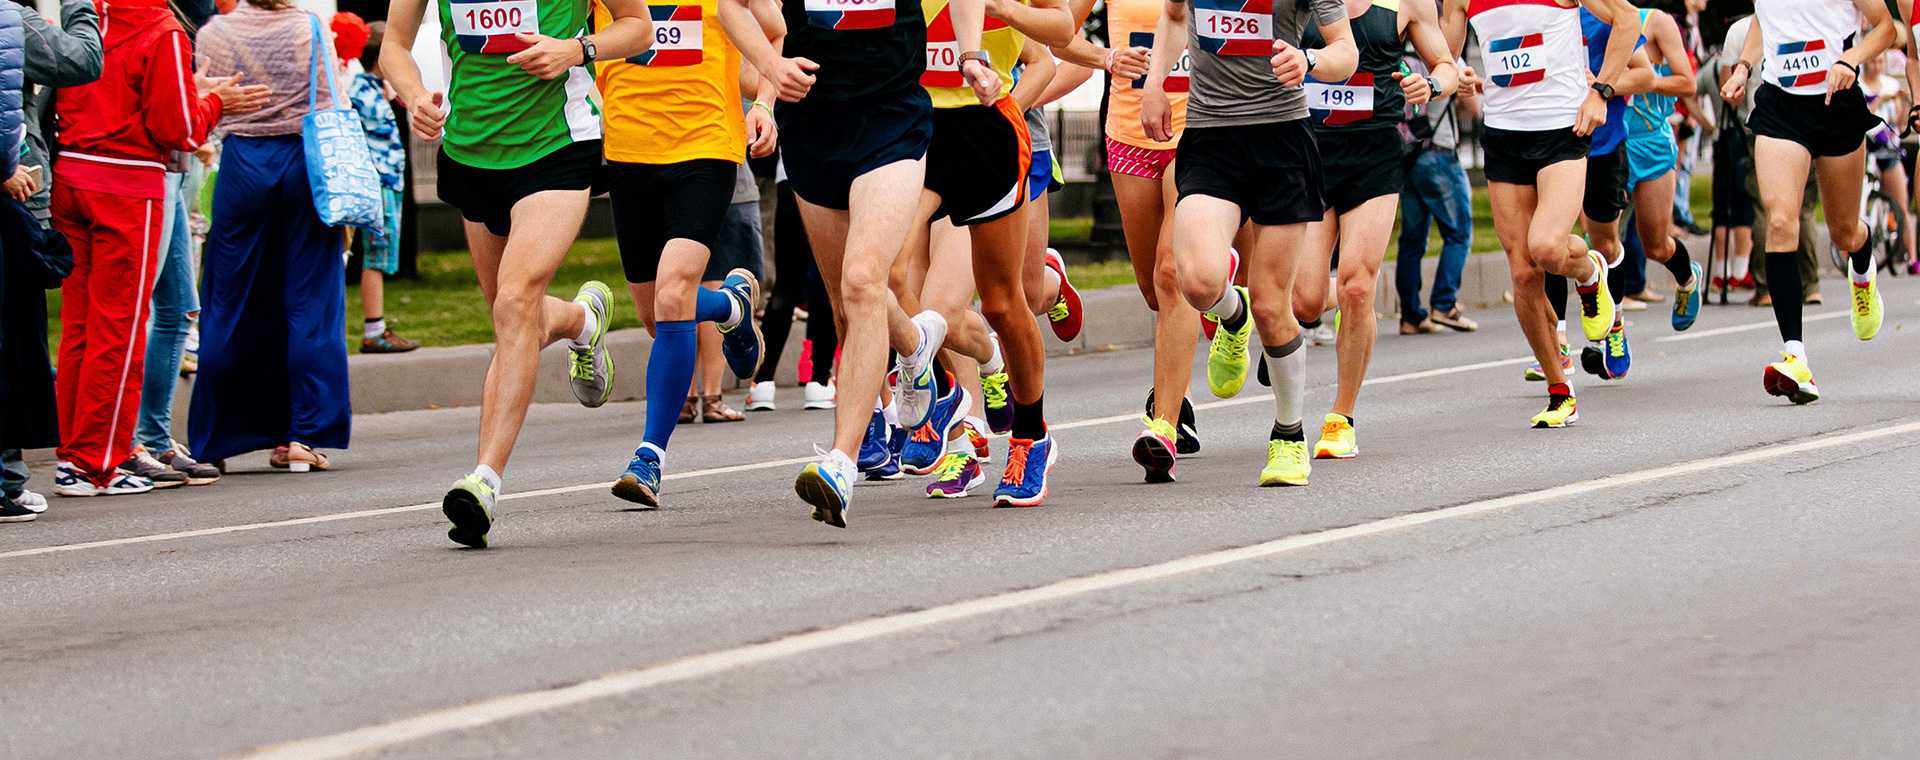 Long distance runners competing at a mass participation event